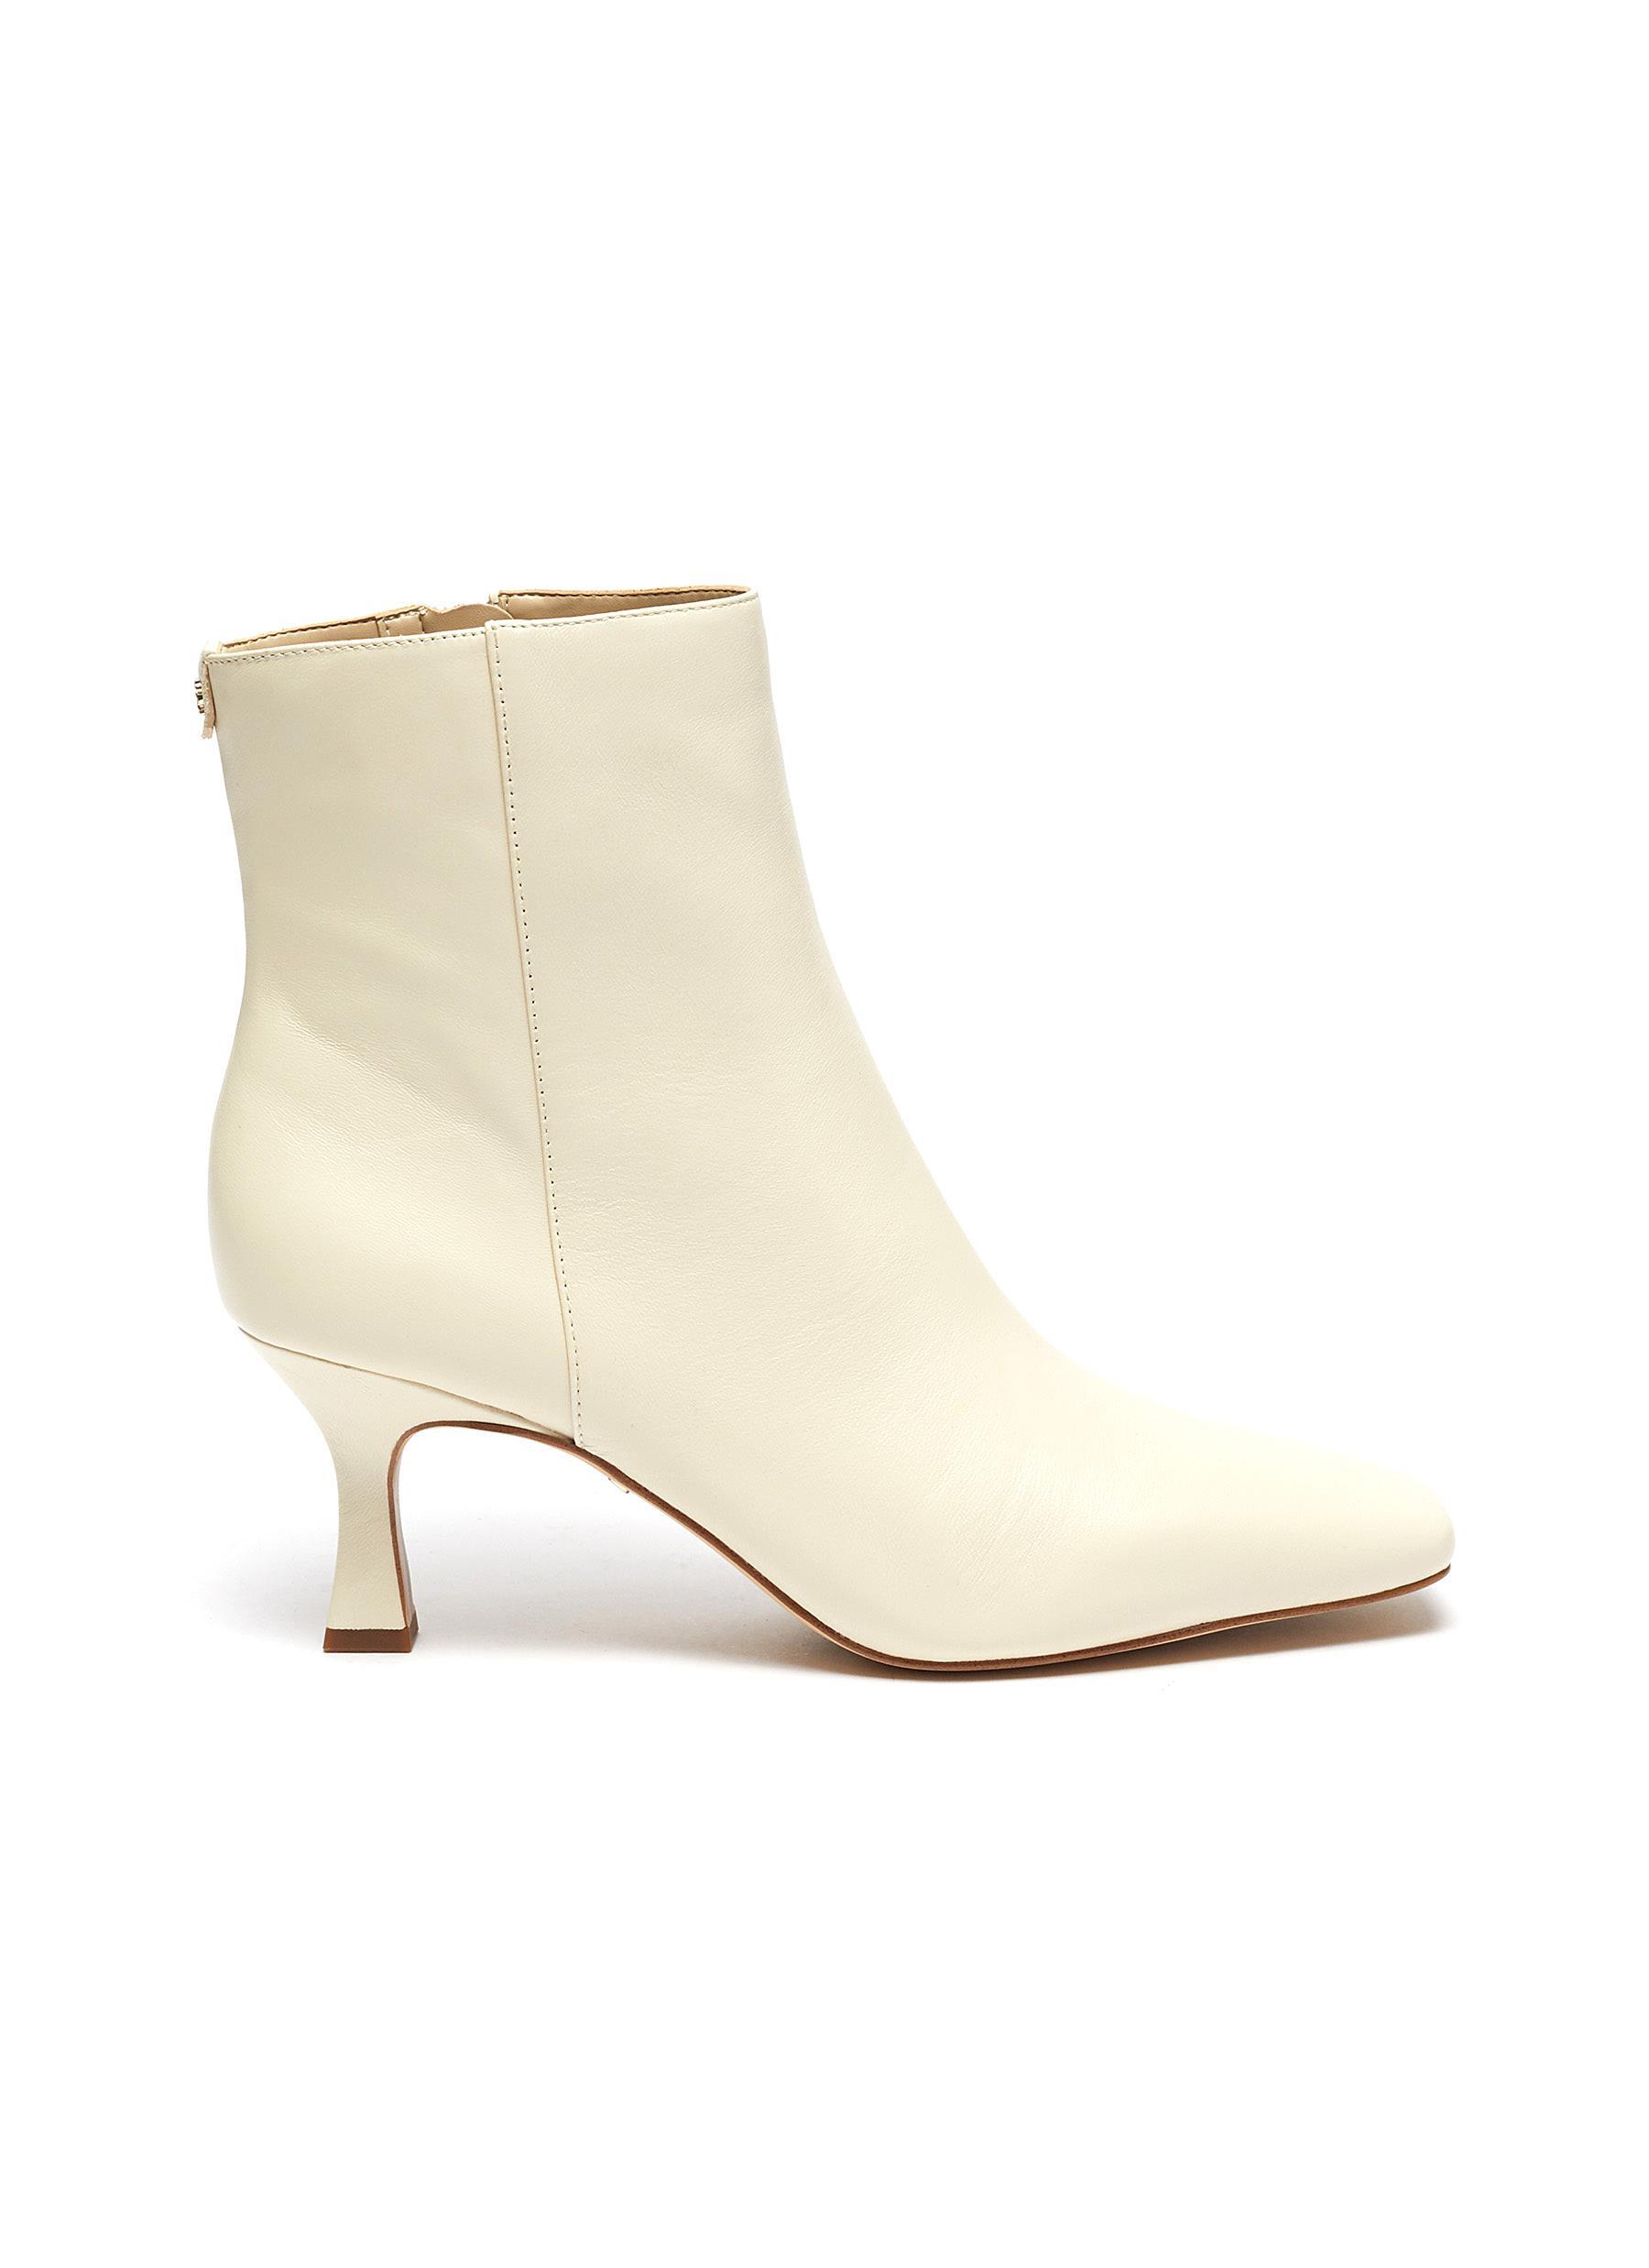 Sam Edelman 'lizzo' Square Toe Leather Ankle Boots in White | Lyst